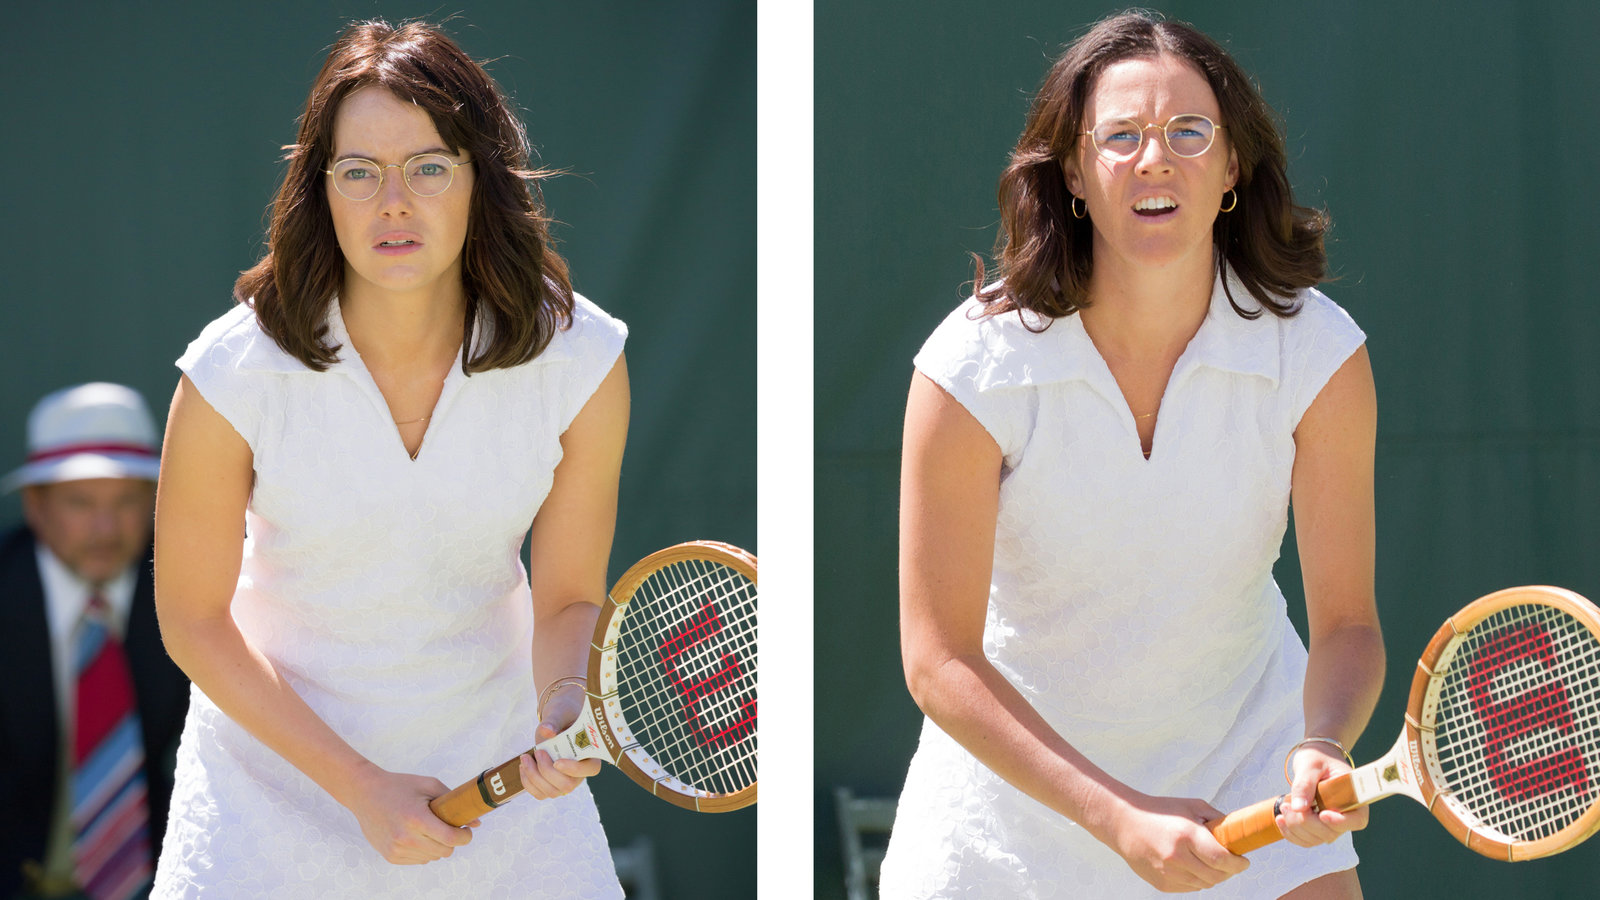 Battle Of The Sexes Movie Wallpapers